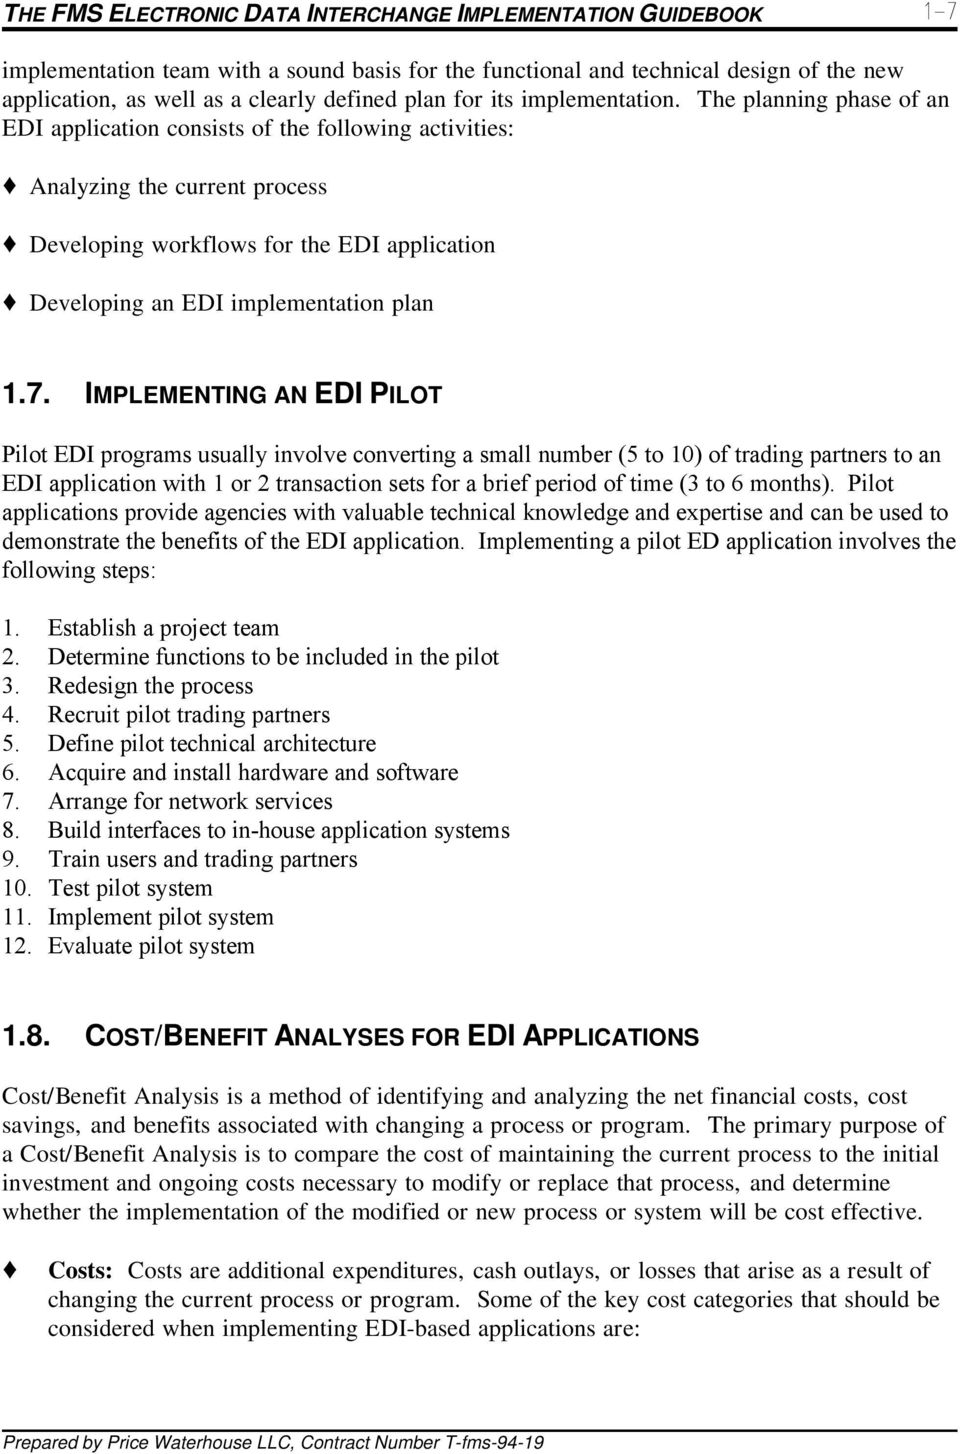 The planning phase of an EDI application consists of the following activities: Analyzing the current process Developing workflows for the EDI application Developing an EDI implementation plan 1.7.